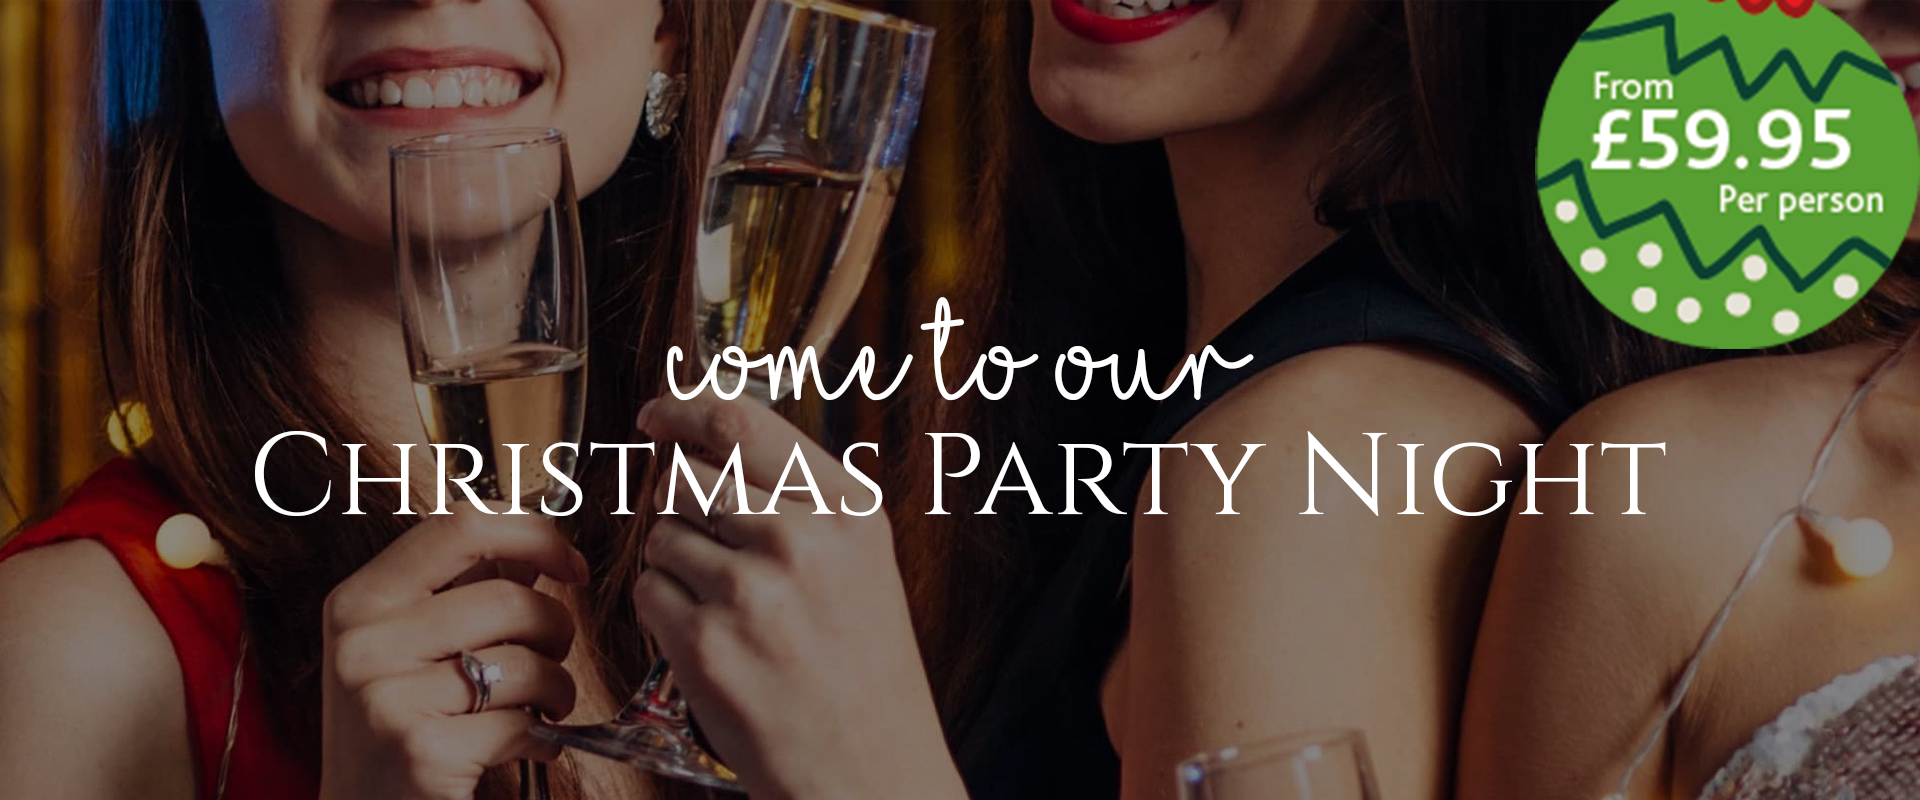 Christmas-Party-Nights-From-£59.95-per-person